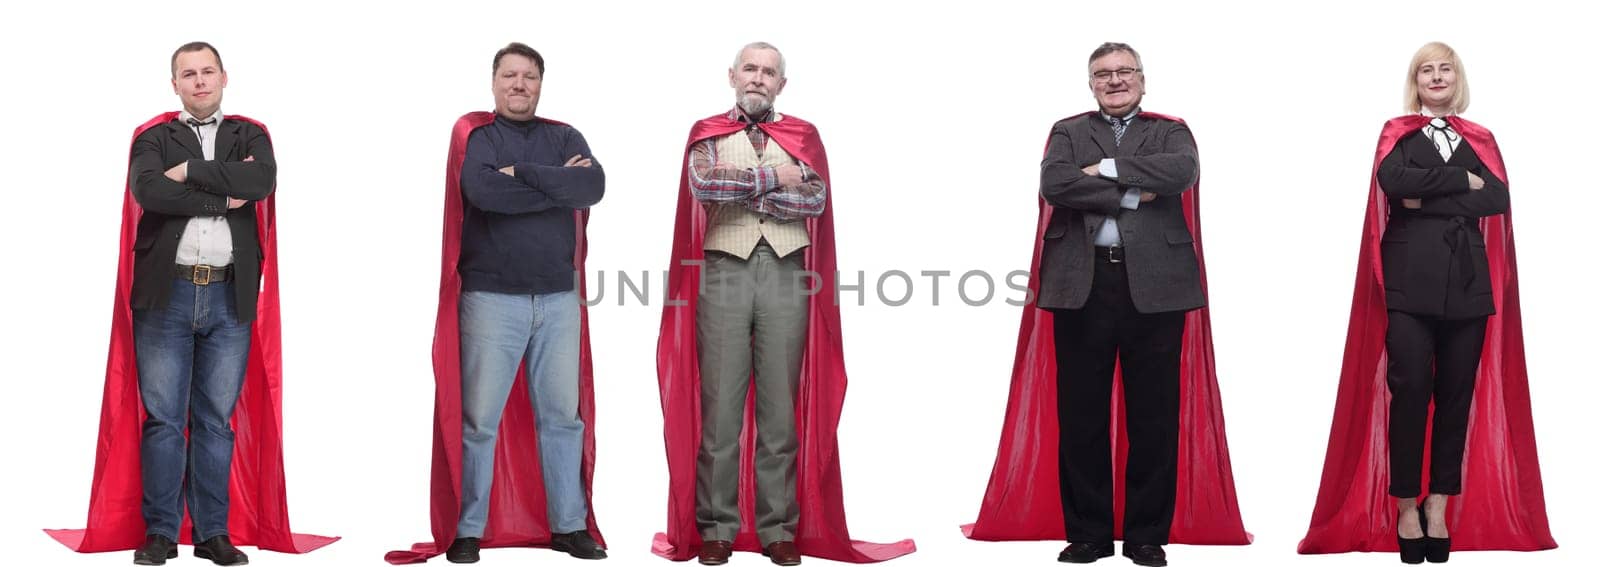 group of people in red raincoat isolated on white background